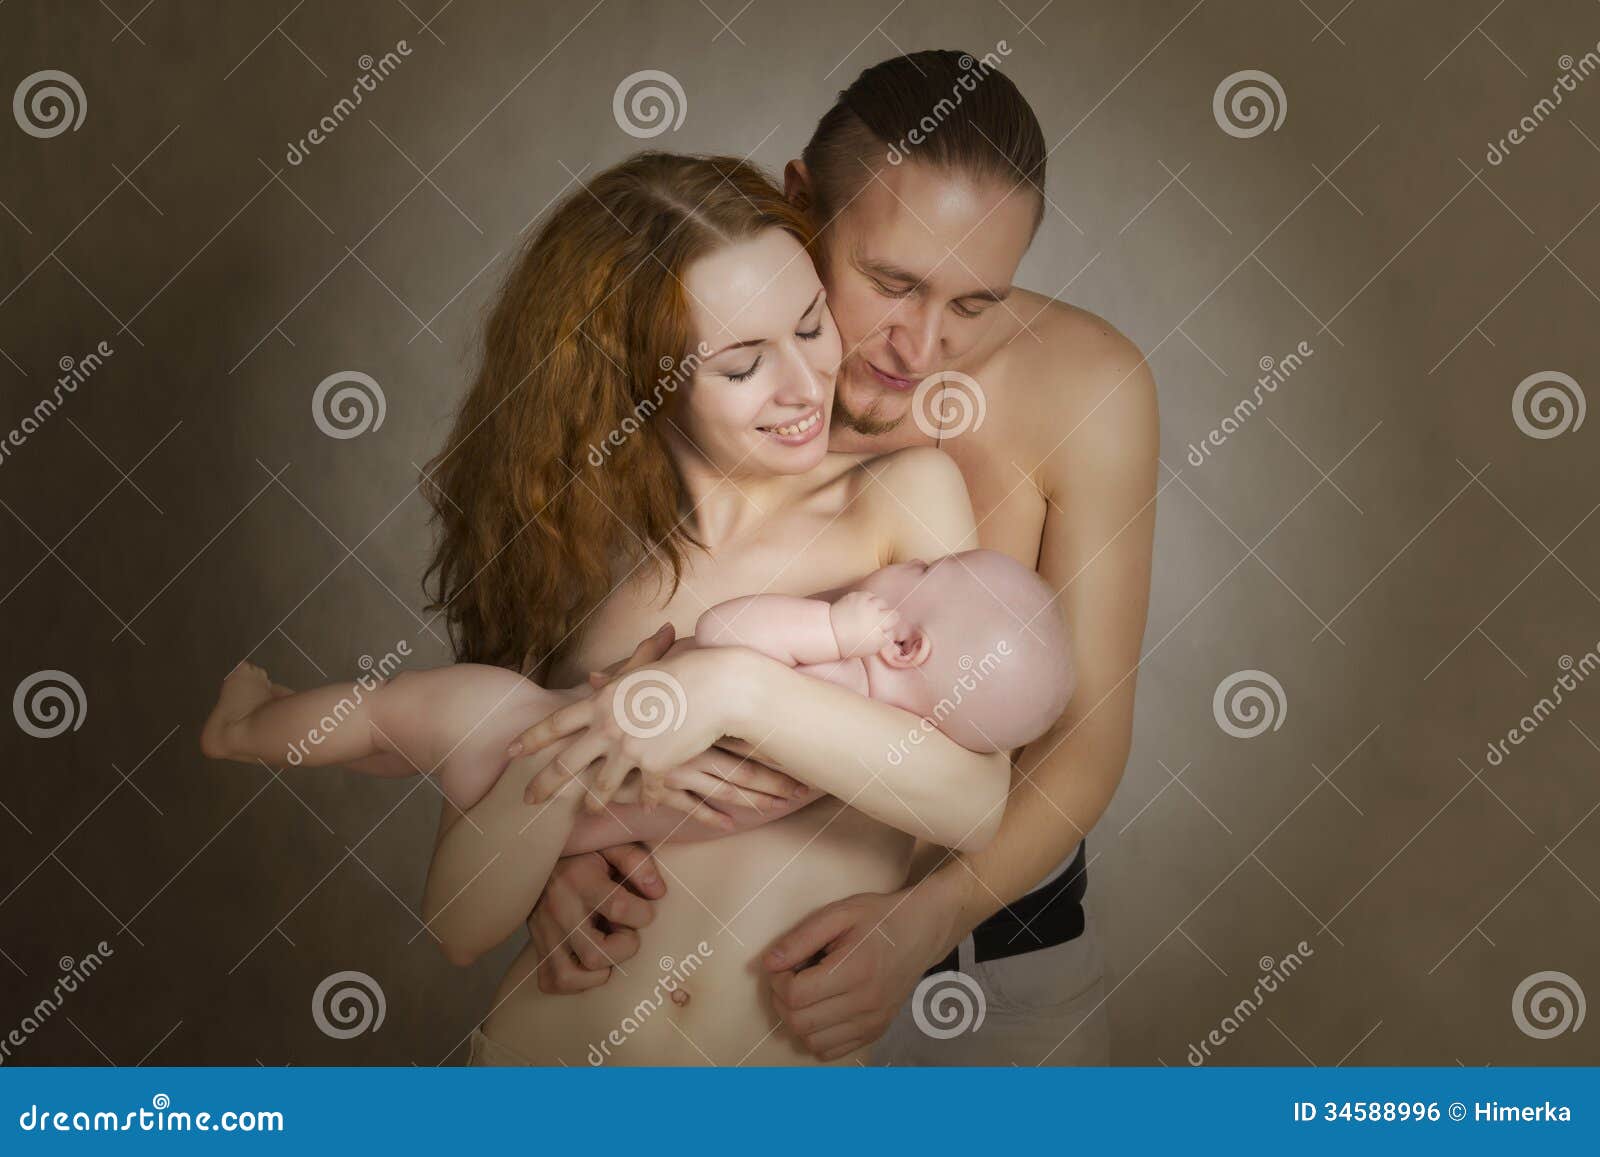 Nude father and mom